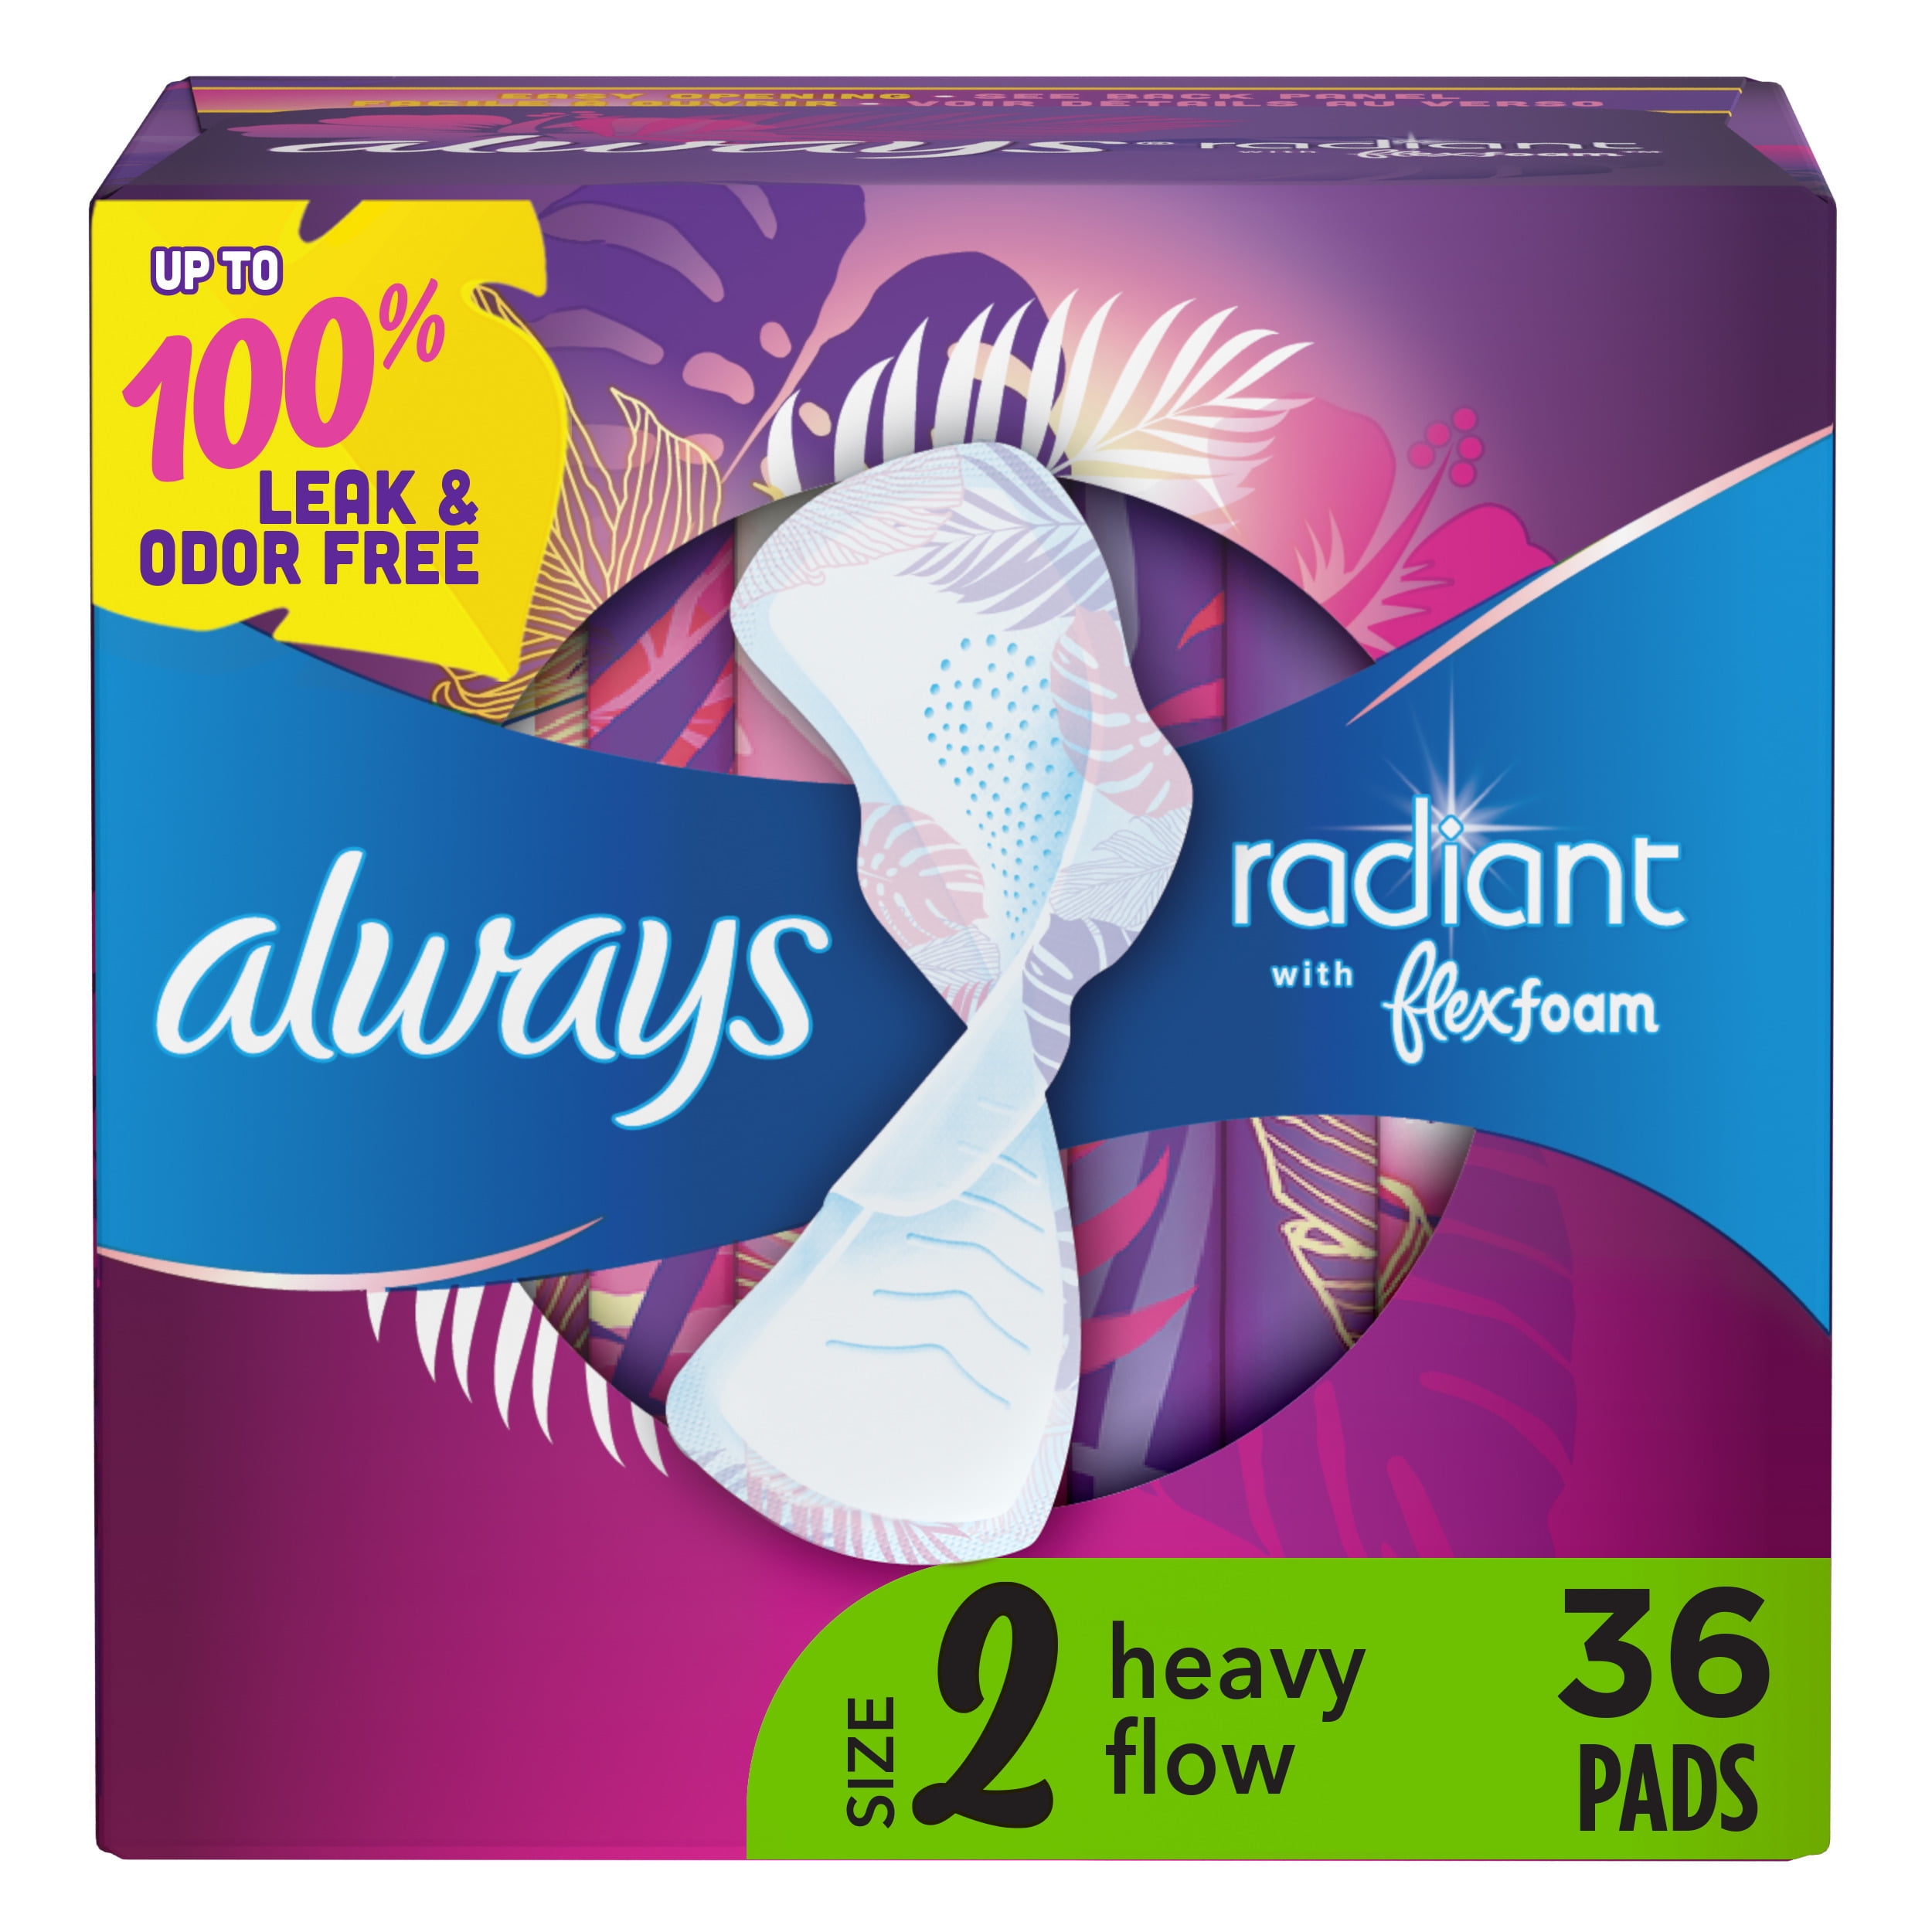 Always Ultra Thin Pads with Flexi-Wings, Size 2, Long Super, Unscented, 58  Pads